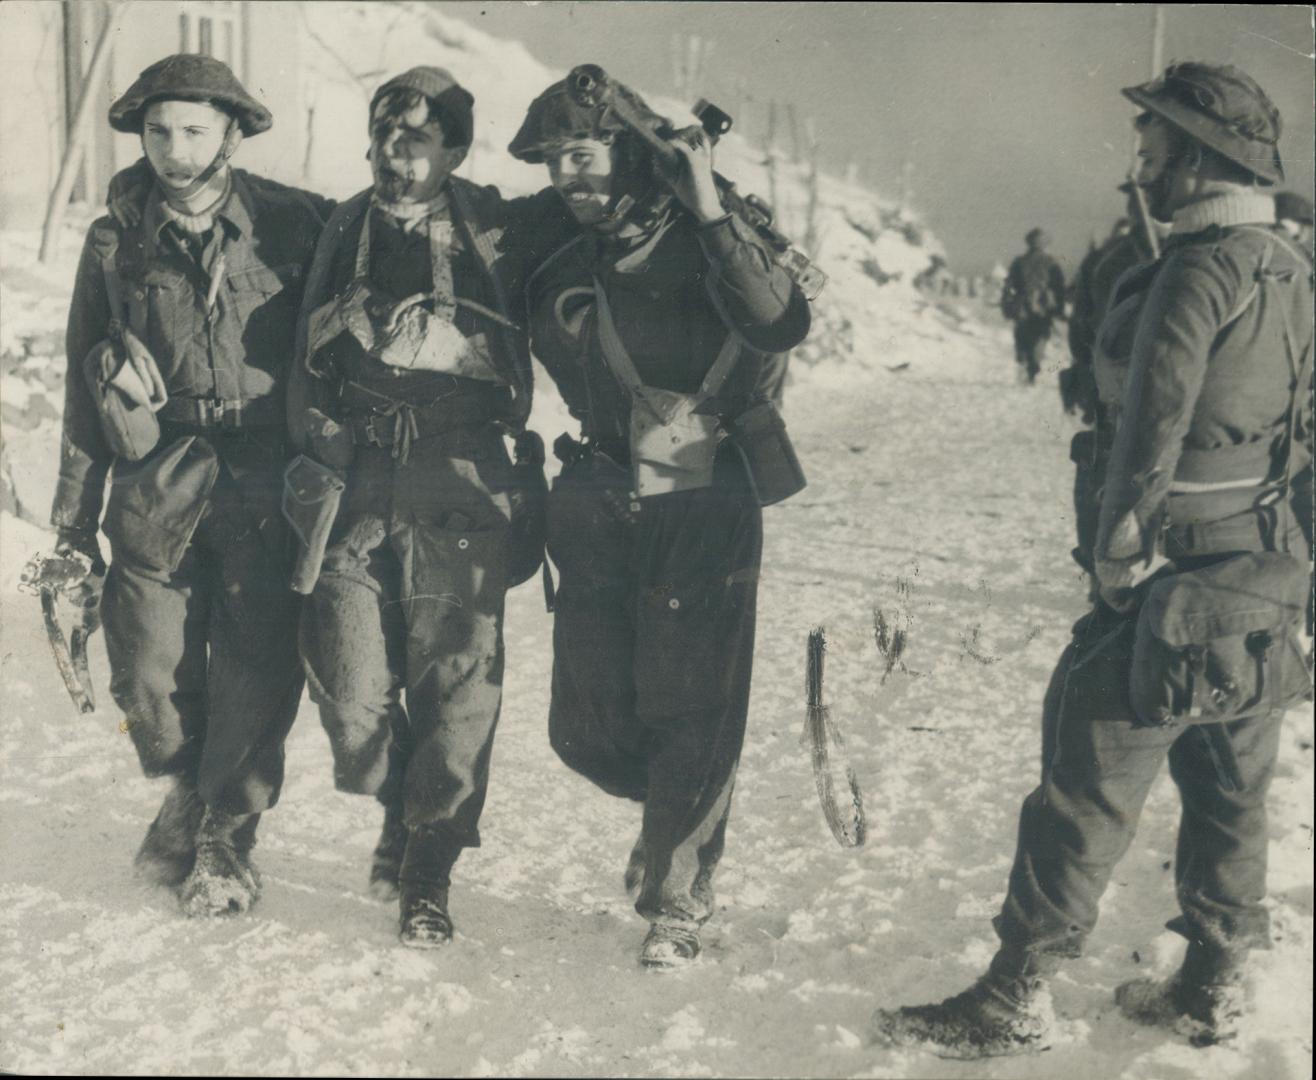 Another triumph for Britain's black-clad Commando troops was recorded in a successful raid on the German-held Norwegian islands of Vaagso and Maoloy. (...)